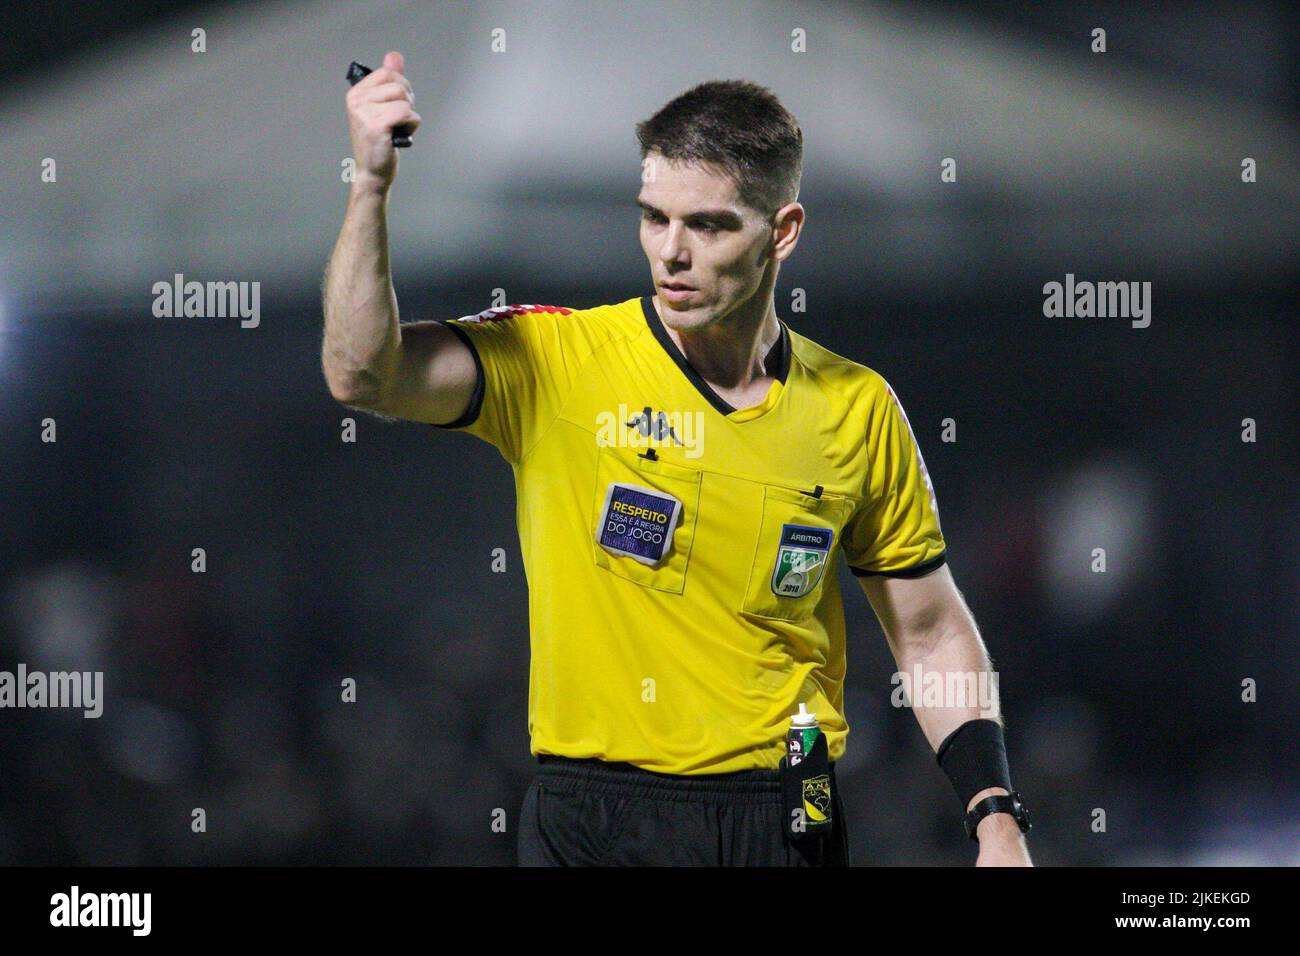 Belem, Brazil. 01st Aug, 2022. PA - Belem - 08/01/2022 - BRAZILIAN C 2022, REMO X FERROVIARIO - Referee Vinicius Gomes do Amaral during a match between Remo and Ferroviario at the Baenao stadium for the Brazilian championship C 2022. Photo: Fernando Torres/AGIF/Sipa USA Credit: Sipa USA/Alamy Live News Stock Photo